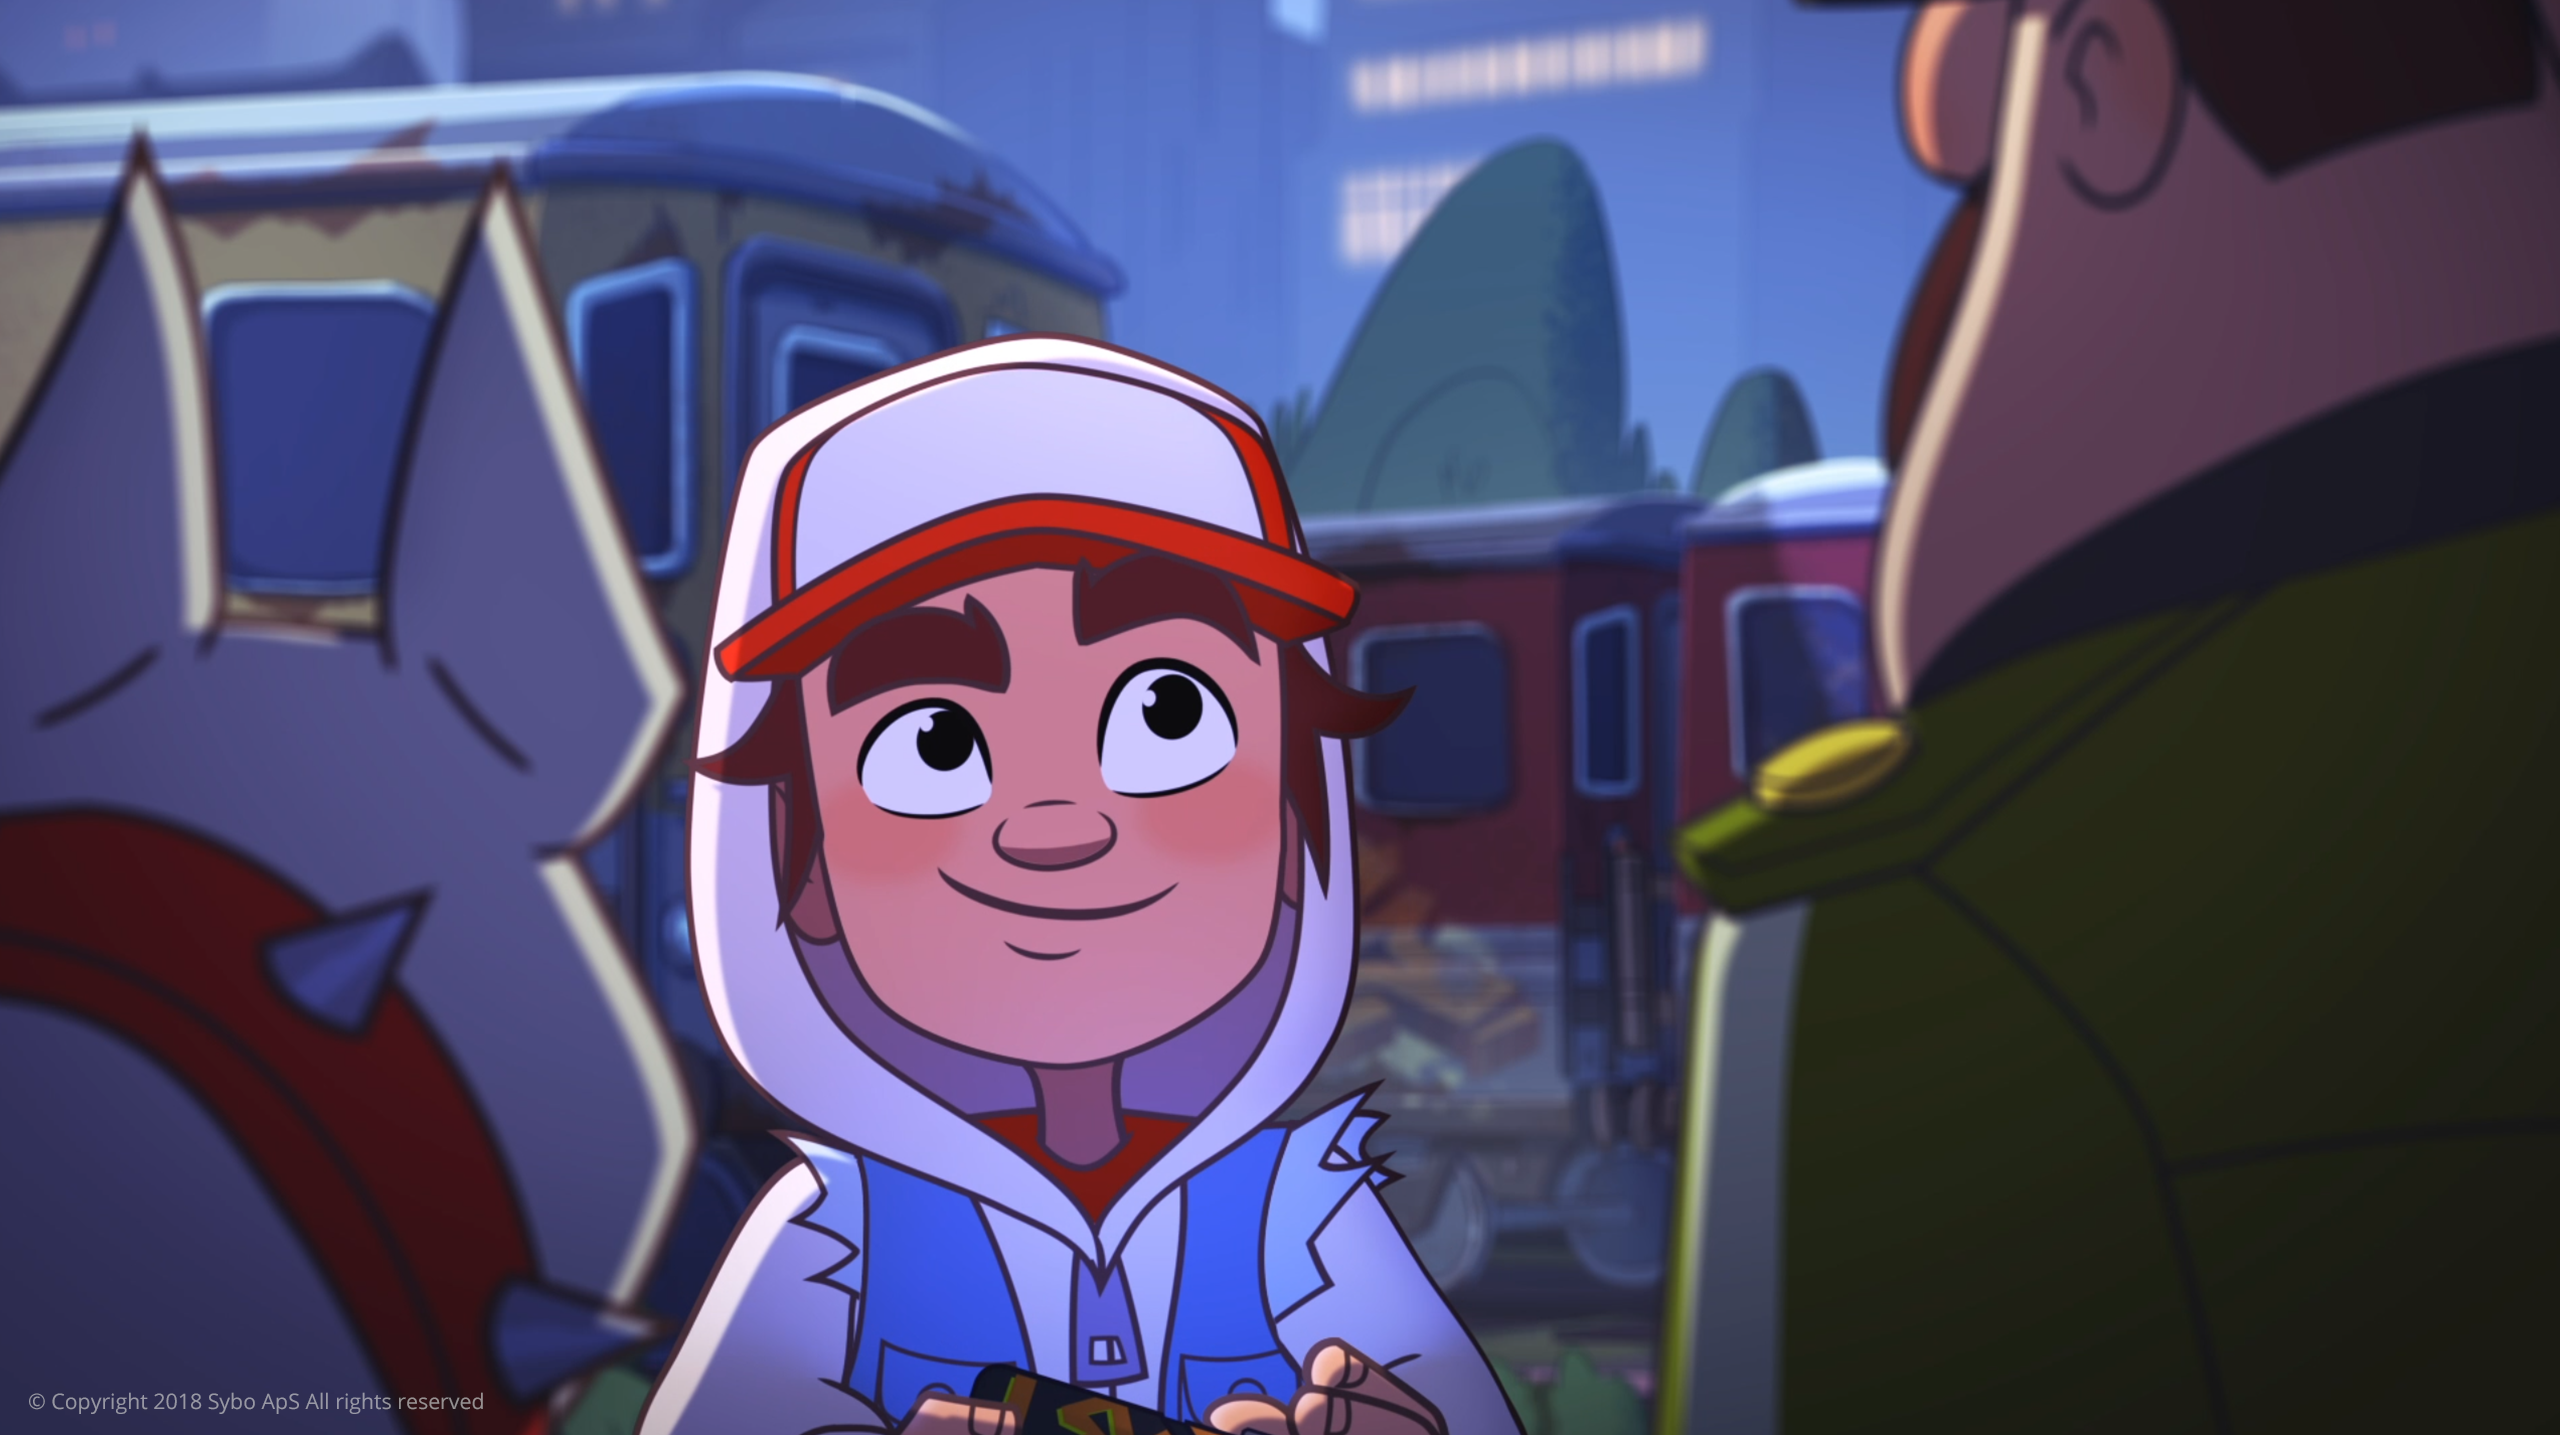 Subway Surfers: The Animated Series (2018)